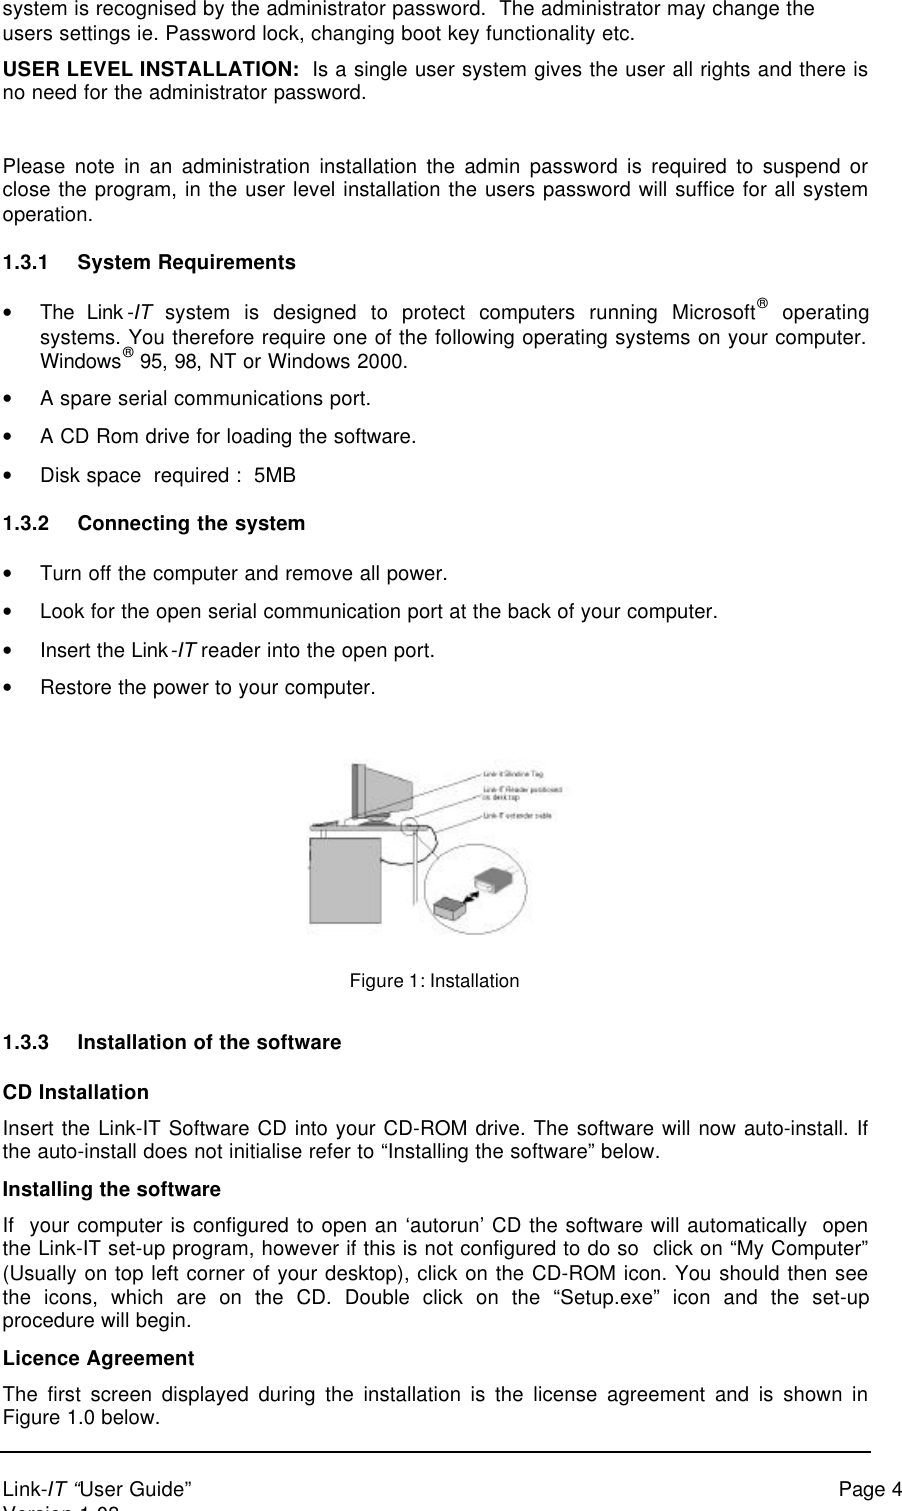 Link-IT “User Guide” Page 4Version 1.03system is recognised by the administrator password.  The administrator may change theusers settings ie. Password lock, changing boot key functionality etc.USER LEVEL INSTALLATION:  Is a single user system gives the user all rights and there isno need for the administrator password.Please note in an administration installation the admin password is required to suspend orclose the program, in the user level installation the users password will suffice for all systemoperation.1.3.1 System Requirements• The Link-IT system is designed to protect computers running Microsoft® operatingsystems. You therefore require one of the following operating systems on your computer.Windows® 95, 98, NT or Windows 2000.• A spare serial communications port.• A CD Rom drive for loading the software.• Disk space  required :  5MB1.3.2 Connecting the system• Turn off the computer and remove all power.• Look for the open serial communication port at the back of your computer.• Insert the Link-IT reader into the open port.• Restore the power to your computer.Figure 1: Installation1.3.3 Installation of the softwareCD InstallationInsert the Link-IT Software CD into your CD-ROM drive. The software will now auto-install. Ifthe auto-install does not initialise refer to “Installing the software” below.Installing the softwareIf  your computer is configured to open an ‘autorun’ CD the software will automatically  openthe Link-IT set-up program, however if this is not configured to do so  click on “My Computer”(Usually on top left corner of your desktop), click on the CD-ROM icon. You should then seethe icons, which are on the CD. Double click on the “Setup.exe” icon and the set-upprocedure will begin.Licence AgreementThe first screen displayed during the installation is the license agreement and is shown inFigure 1.0 below.